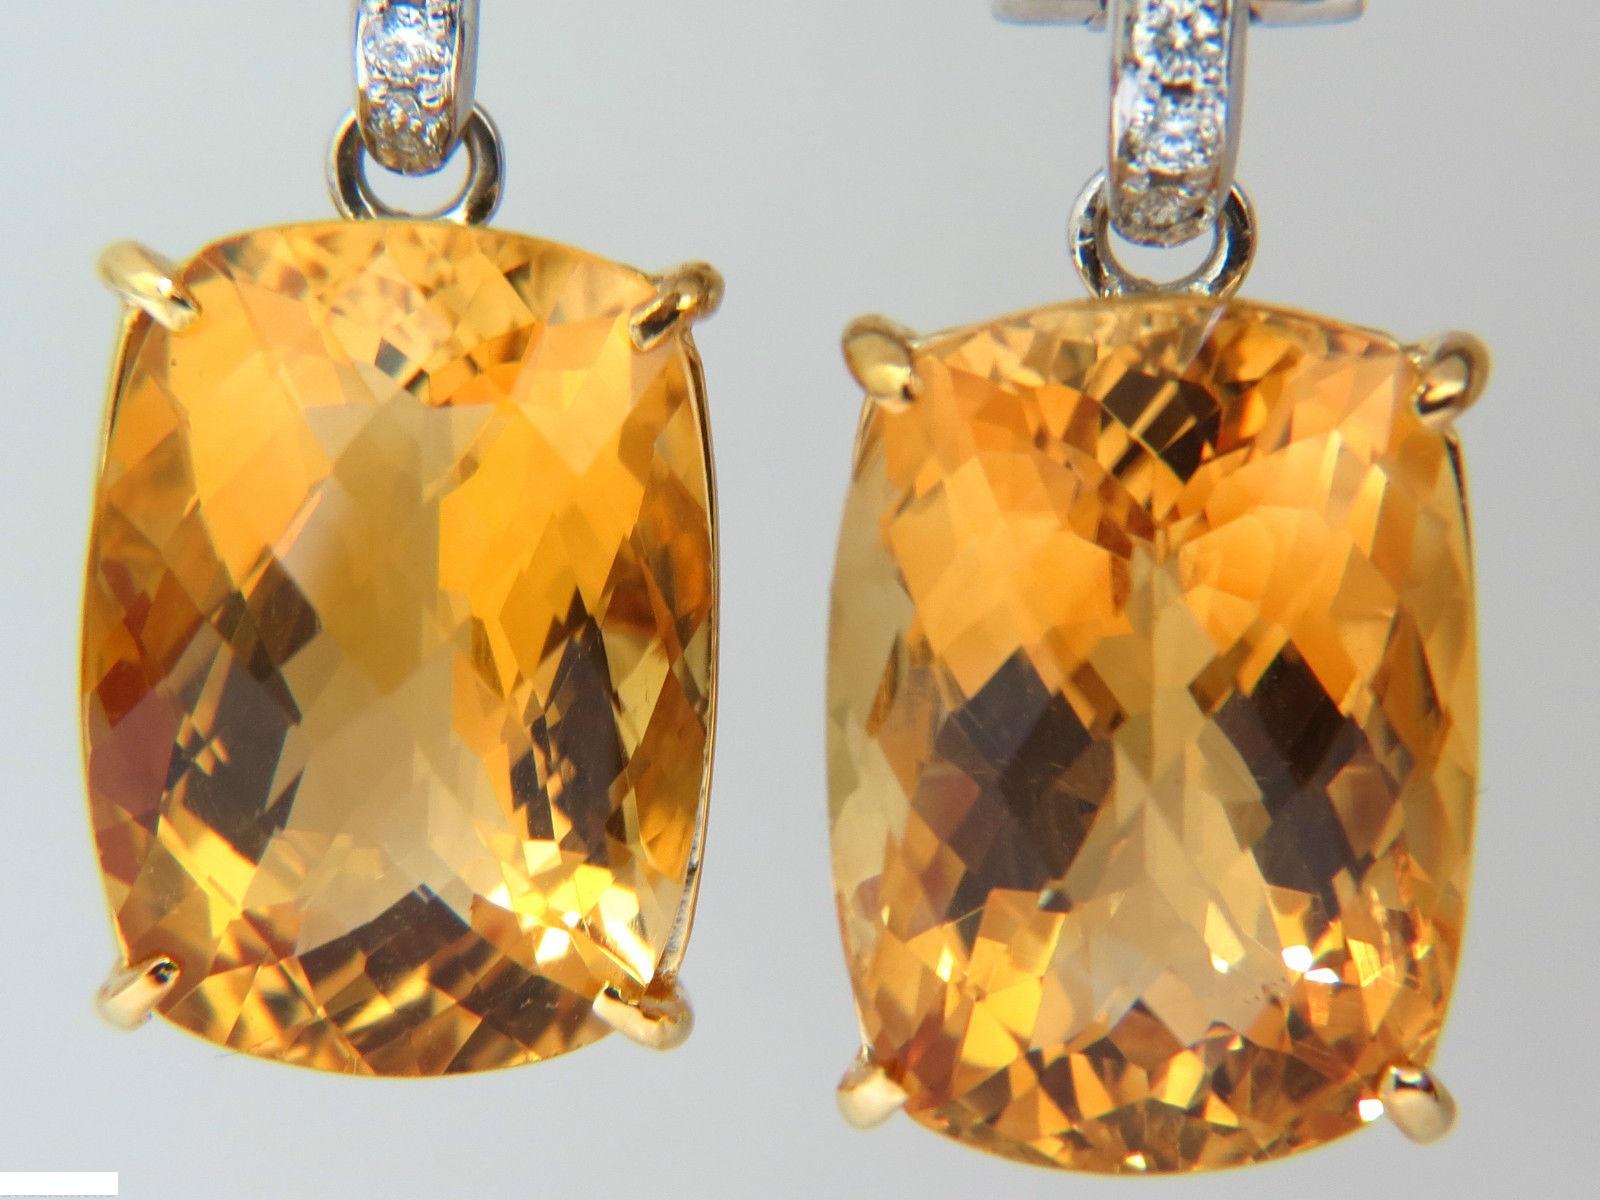 25.00ct. Natural Citrine

Rose cut, Full brilliance

Clean Clarity

17.3 X 12.6mm

1.50ct. diamonds

G-color, Vs-2 clarity. 

18kt. white gold

1.6 inch long

18.8 grams.

Earrings are gorgeous made

Omega clips

$9500 appraisal will accompany